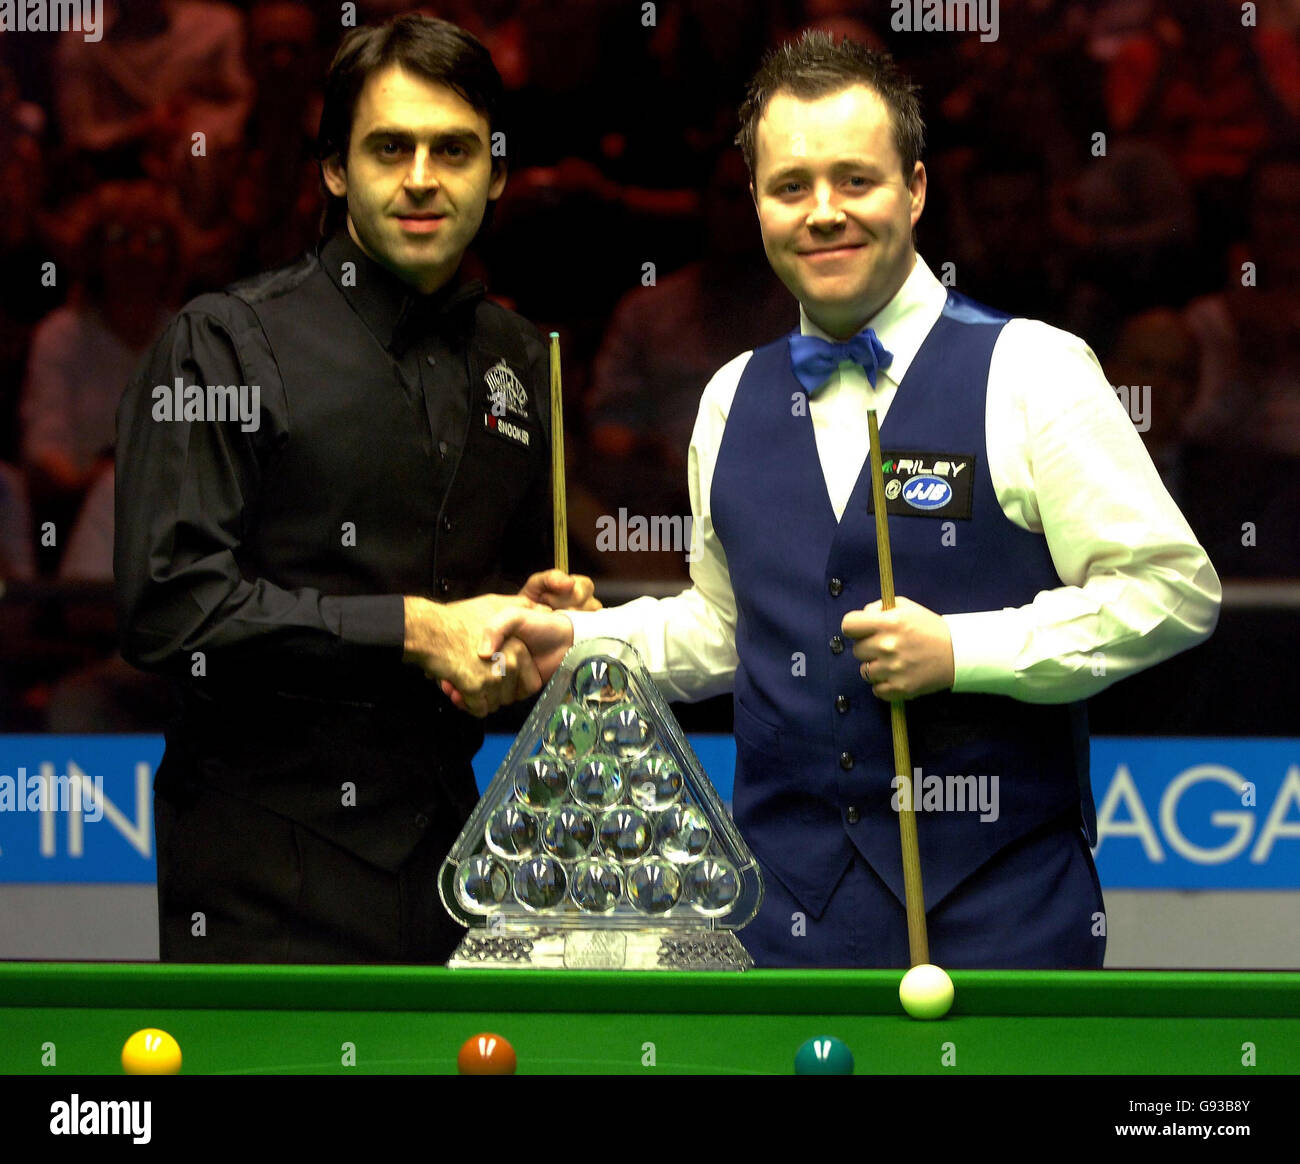 Englands Ronnie OSullivan (L) shakes hands with Scotlands John Higgins ahead of the final session of the SAGA Insurance Masters final at the Wembley Conference Centre, Sunday January 22, 2006